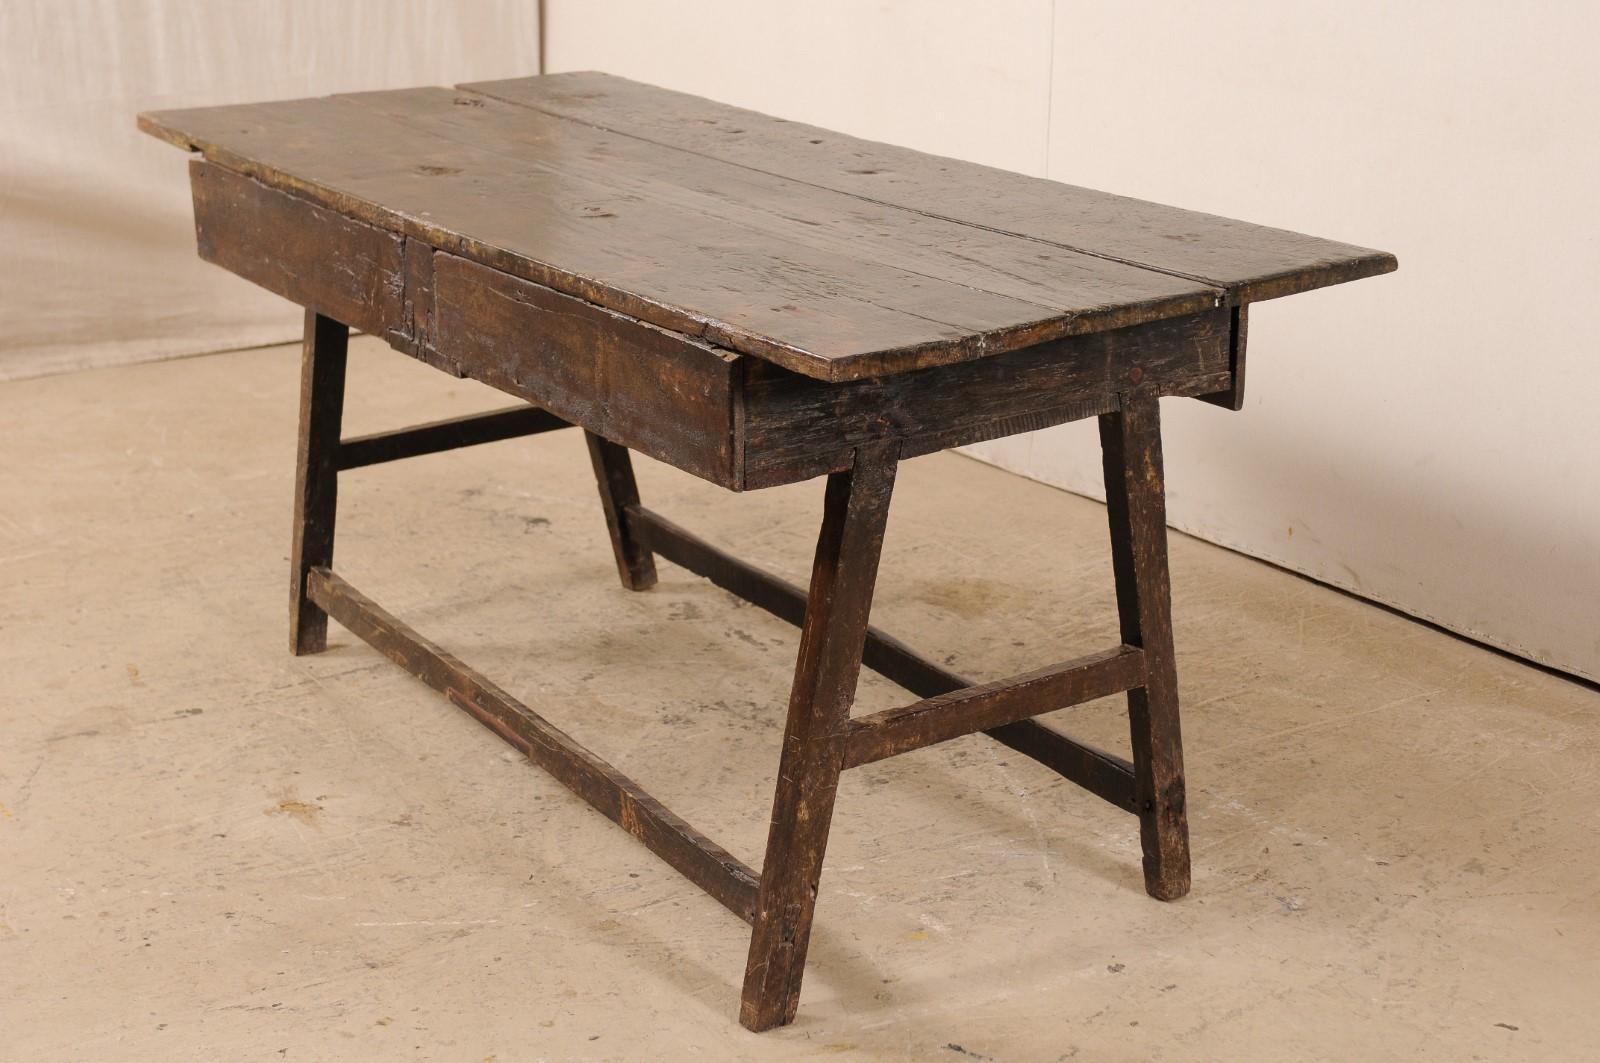 Late 17th C. Brazilian Peroba Wood Console Table w/Drawers & Sawhorse Style Legs For Sale 2